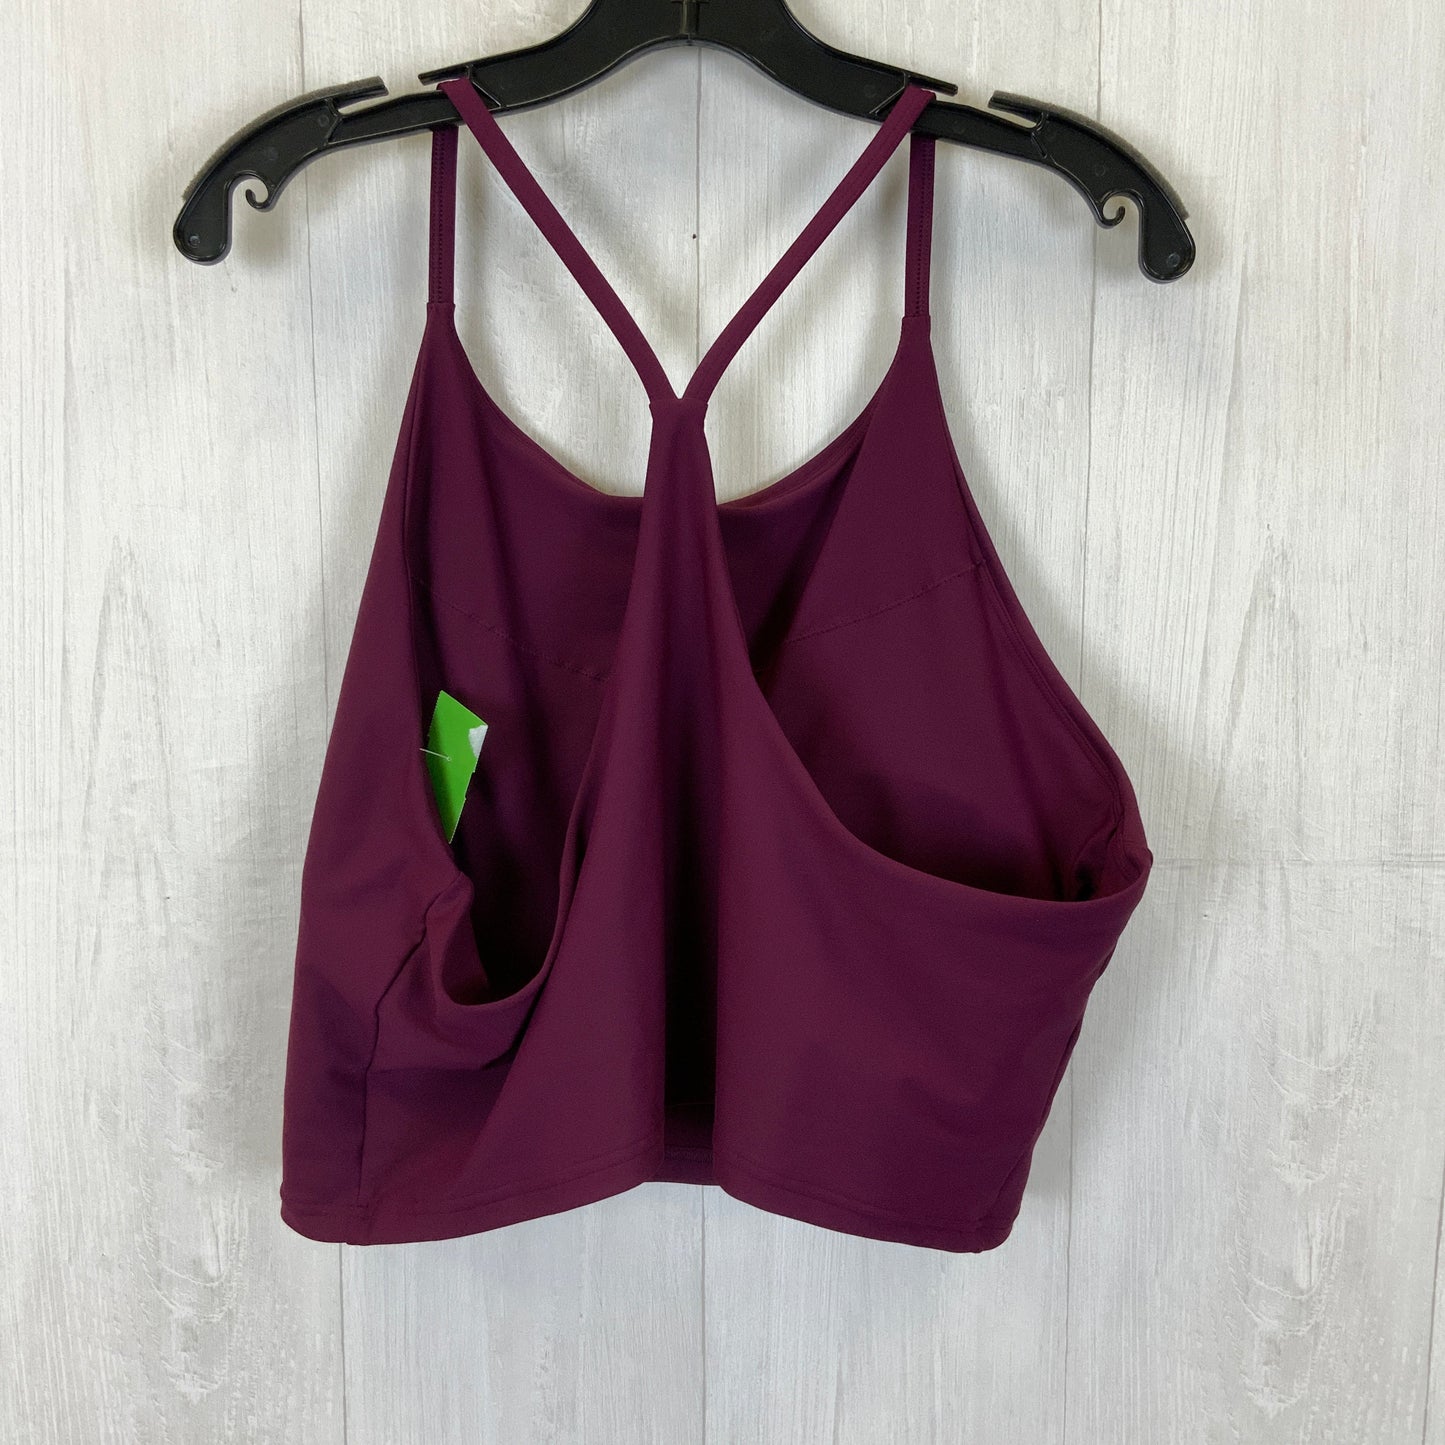 Purple Athletic Tank Top Old Navy, Size 2x